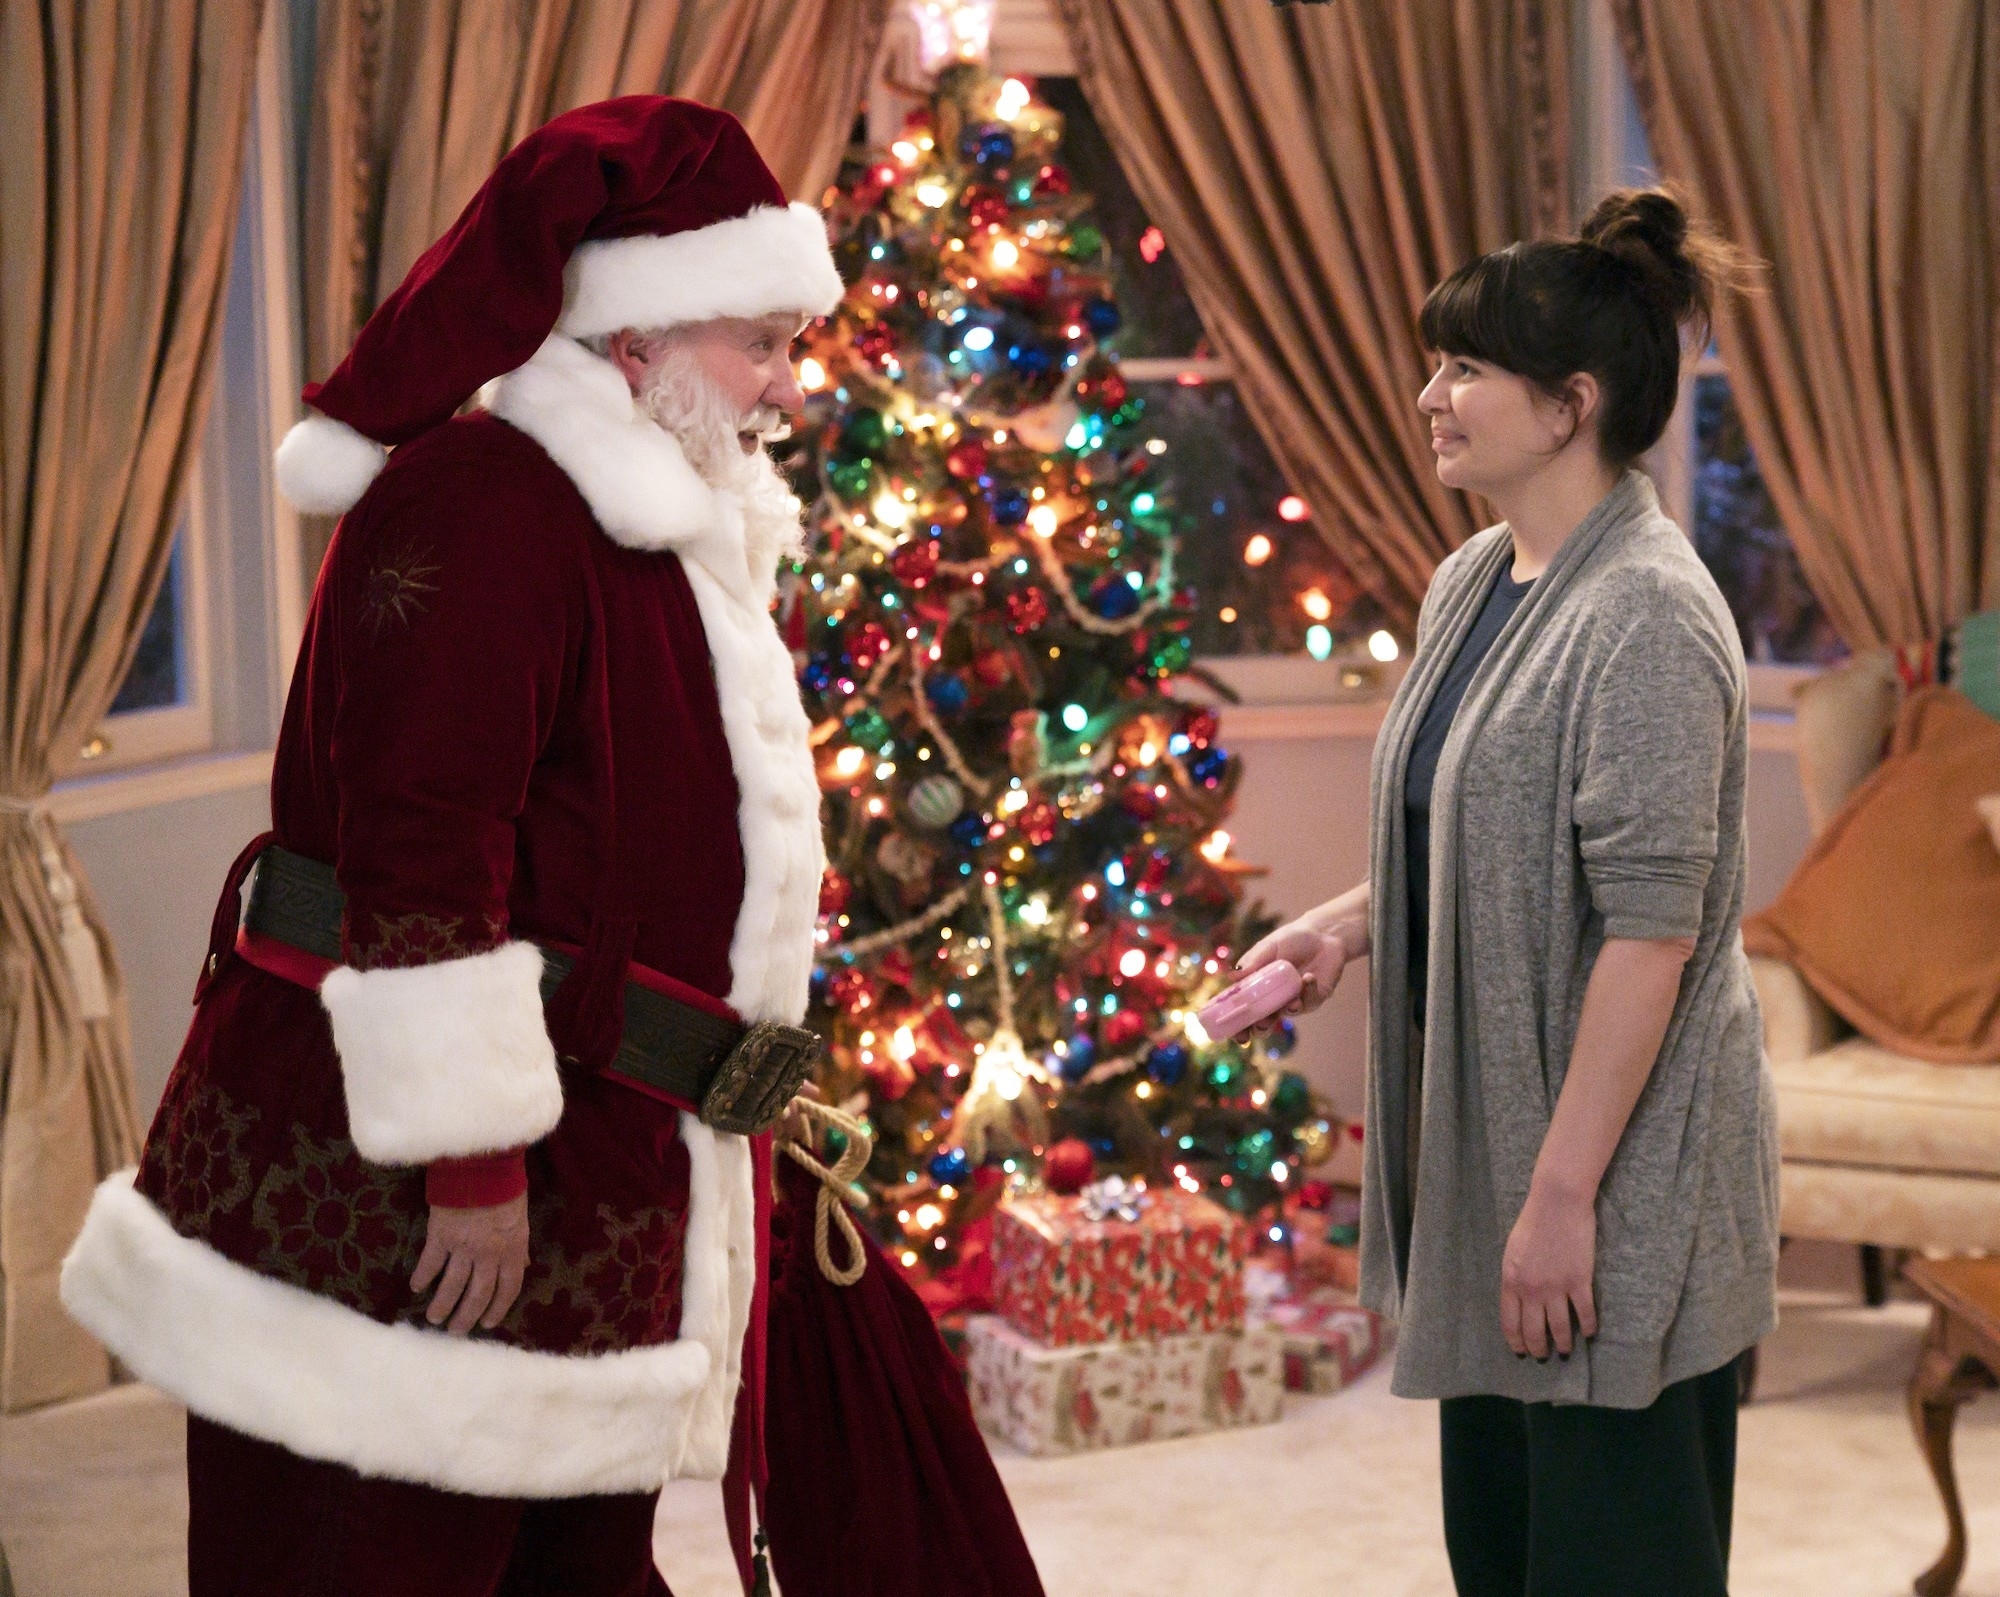 Tim and Casey on set, him in a Santa suit and her dressed casually